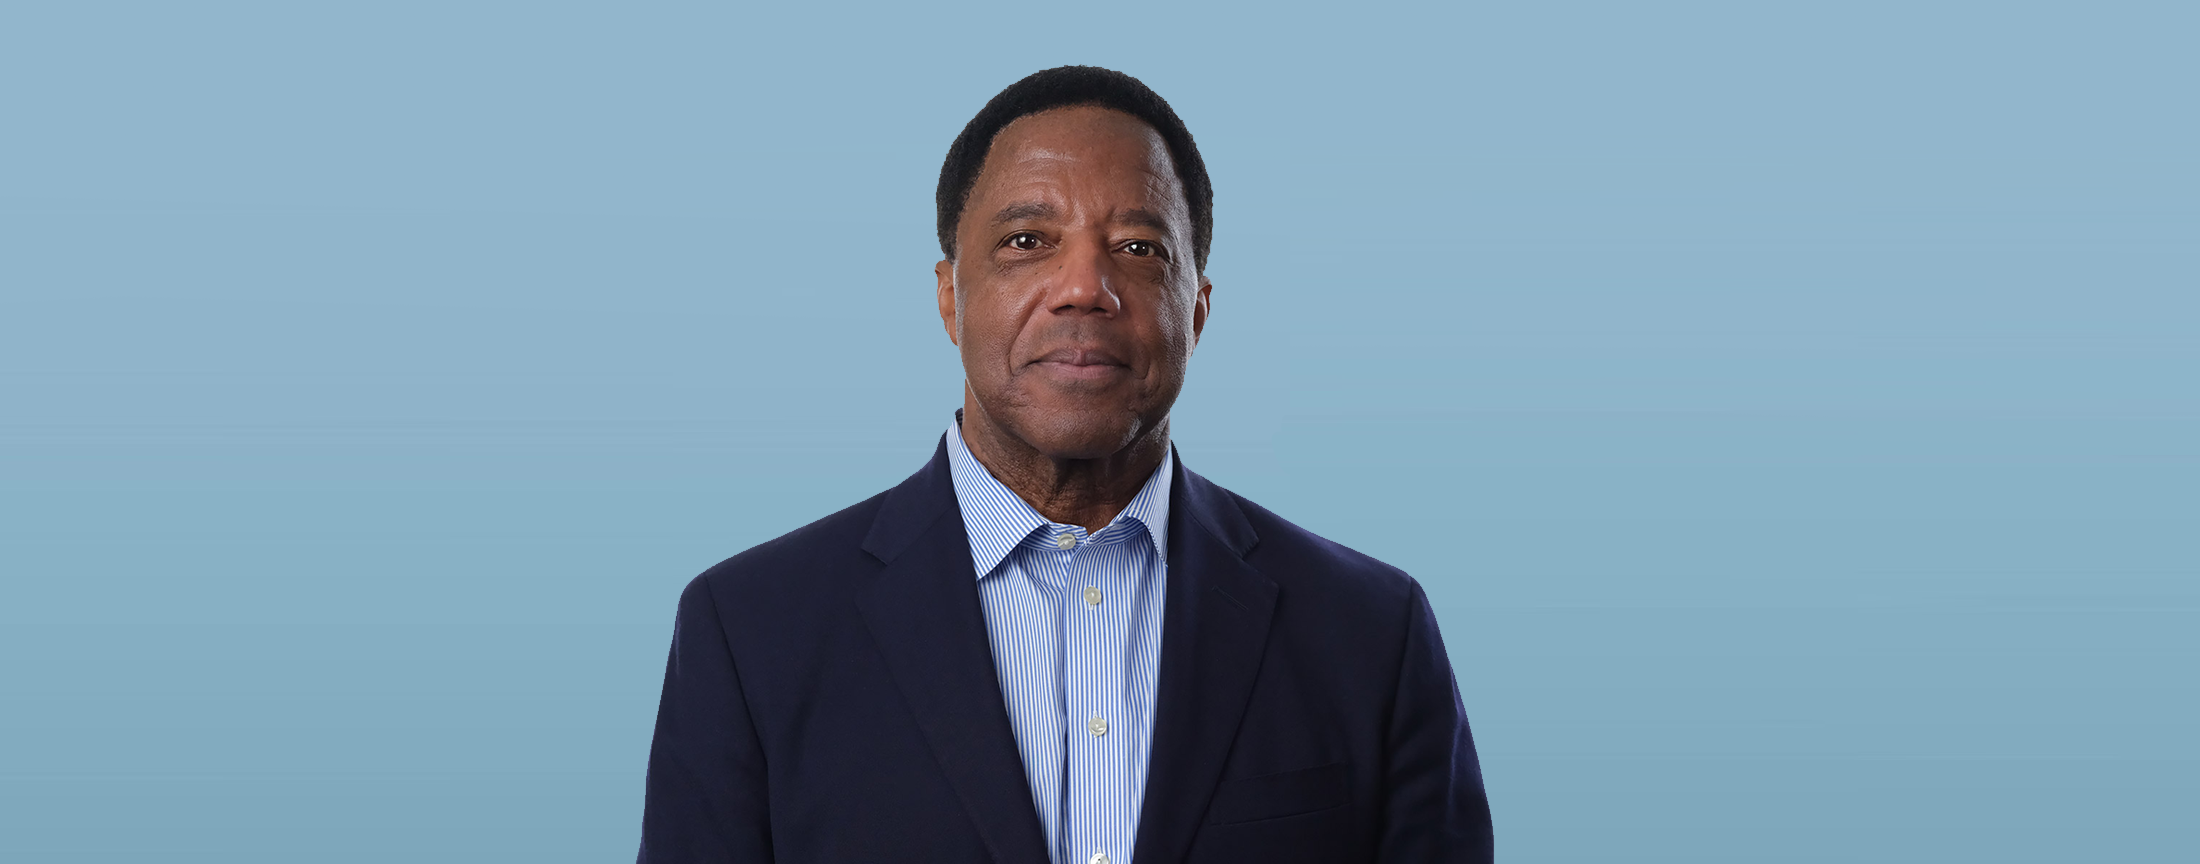 Vituity CEO, Dr. Imamu Tomlinson, shares why CommonSpirit CEO, Lloyd Dean, is a model healthcare leader dedicated to improving equitable access to healthcare.